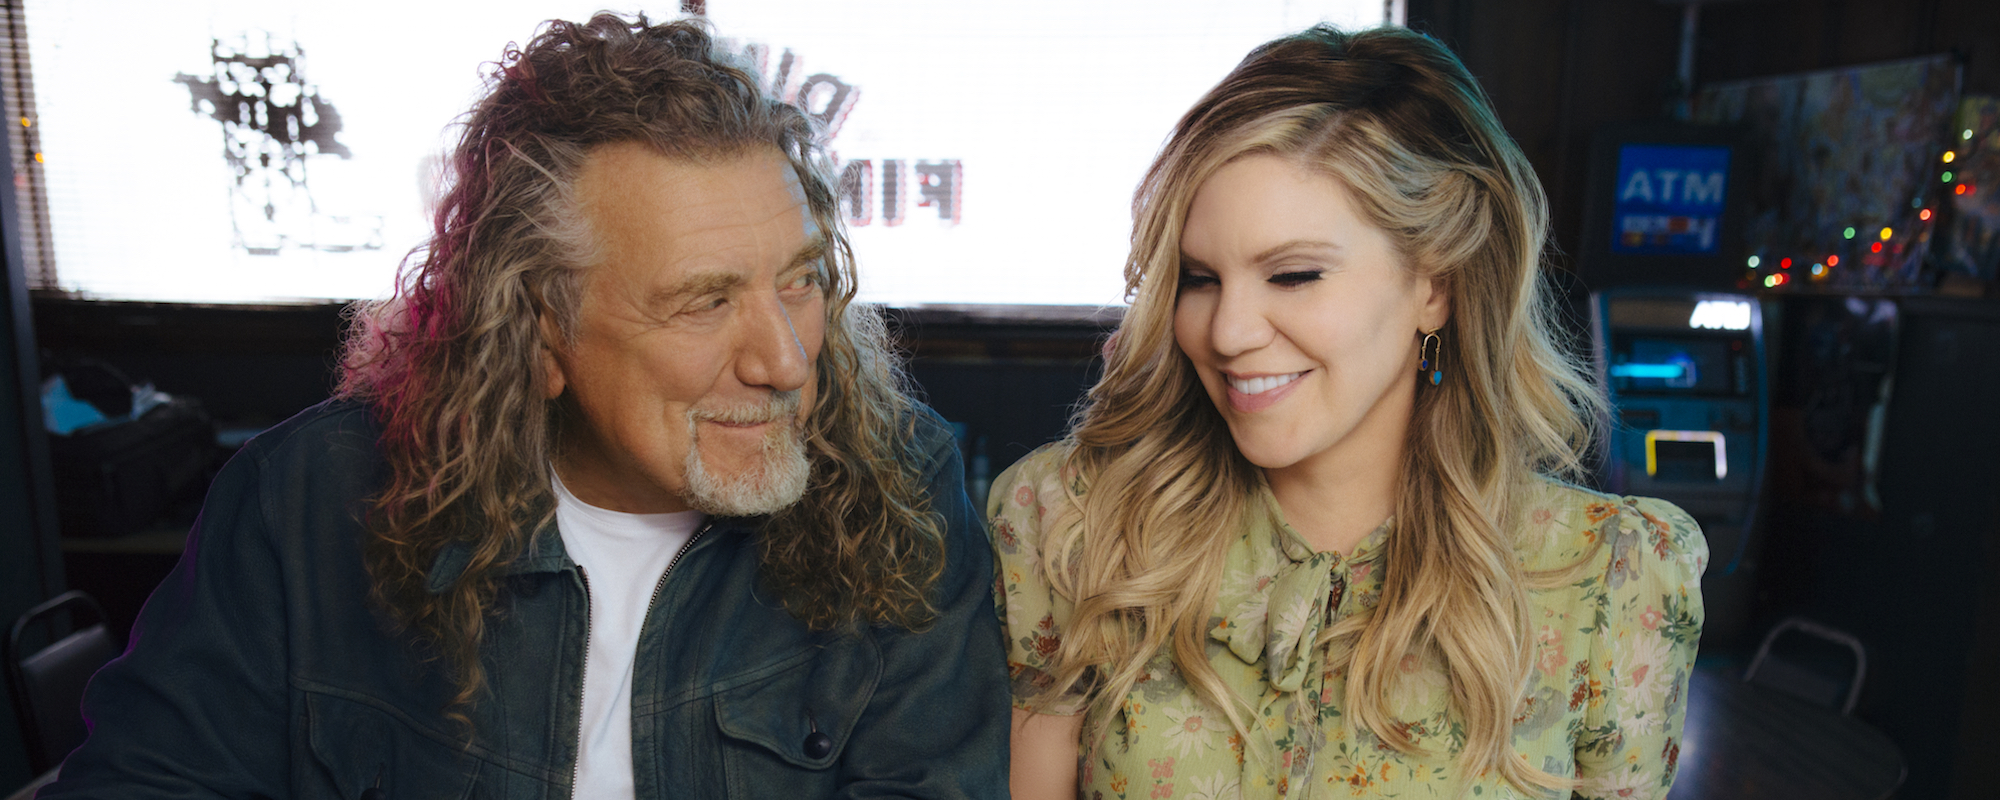 Robert Plant, Alison Krauss Share “High and Lonesome”